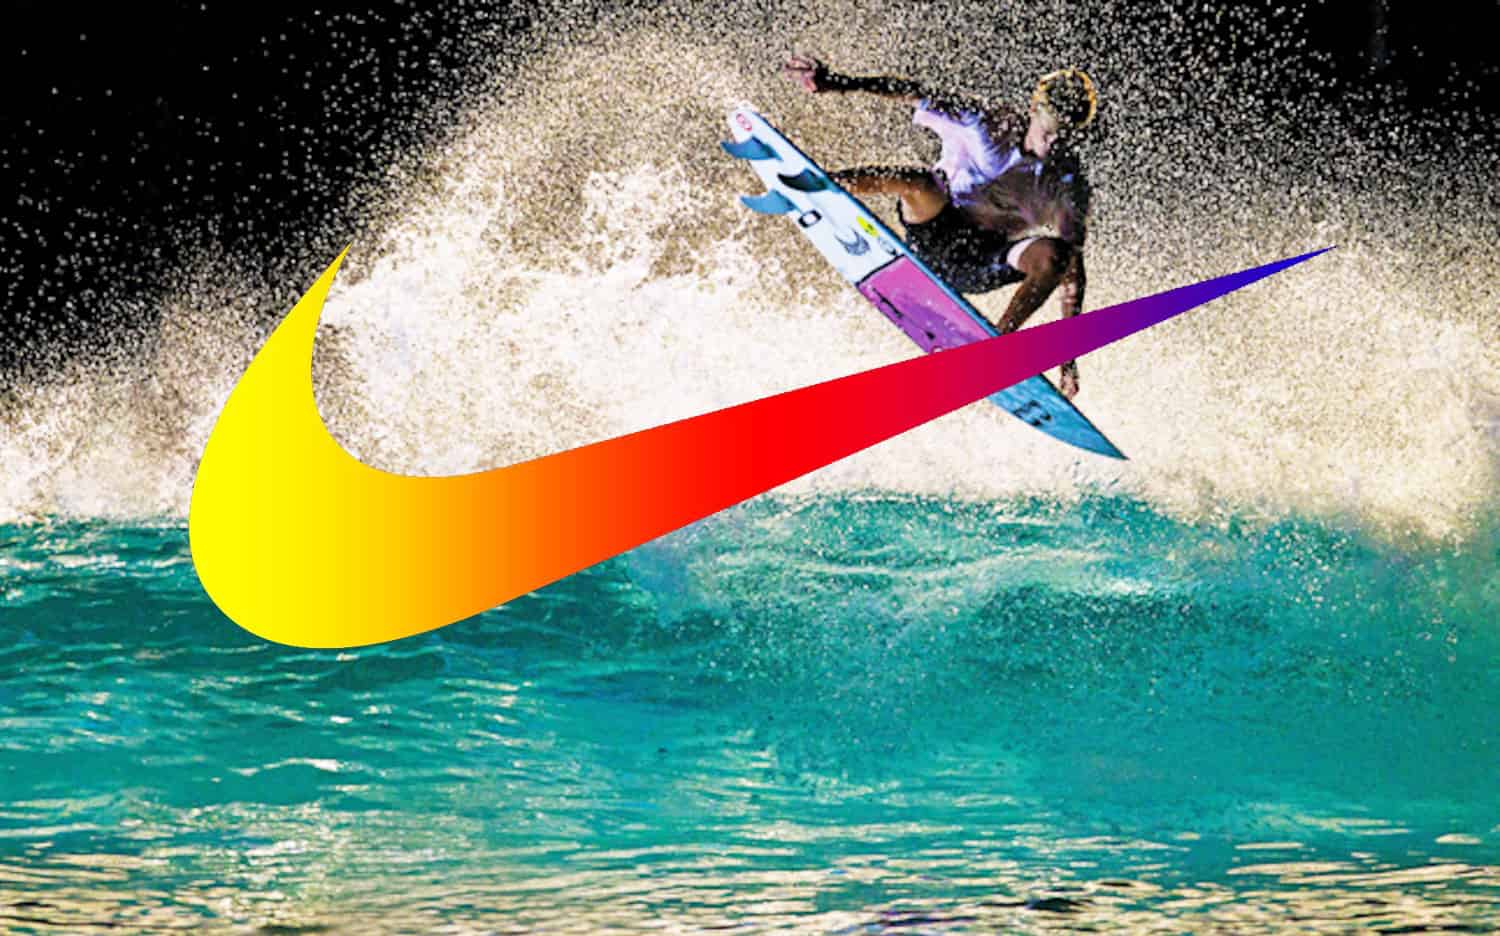 Nike could sell off Hurley surfwear brand - Inside Retail Asia